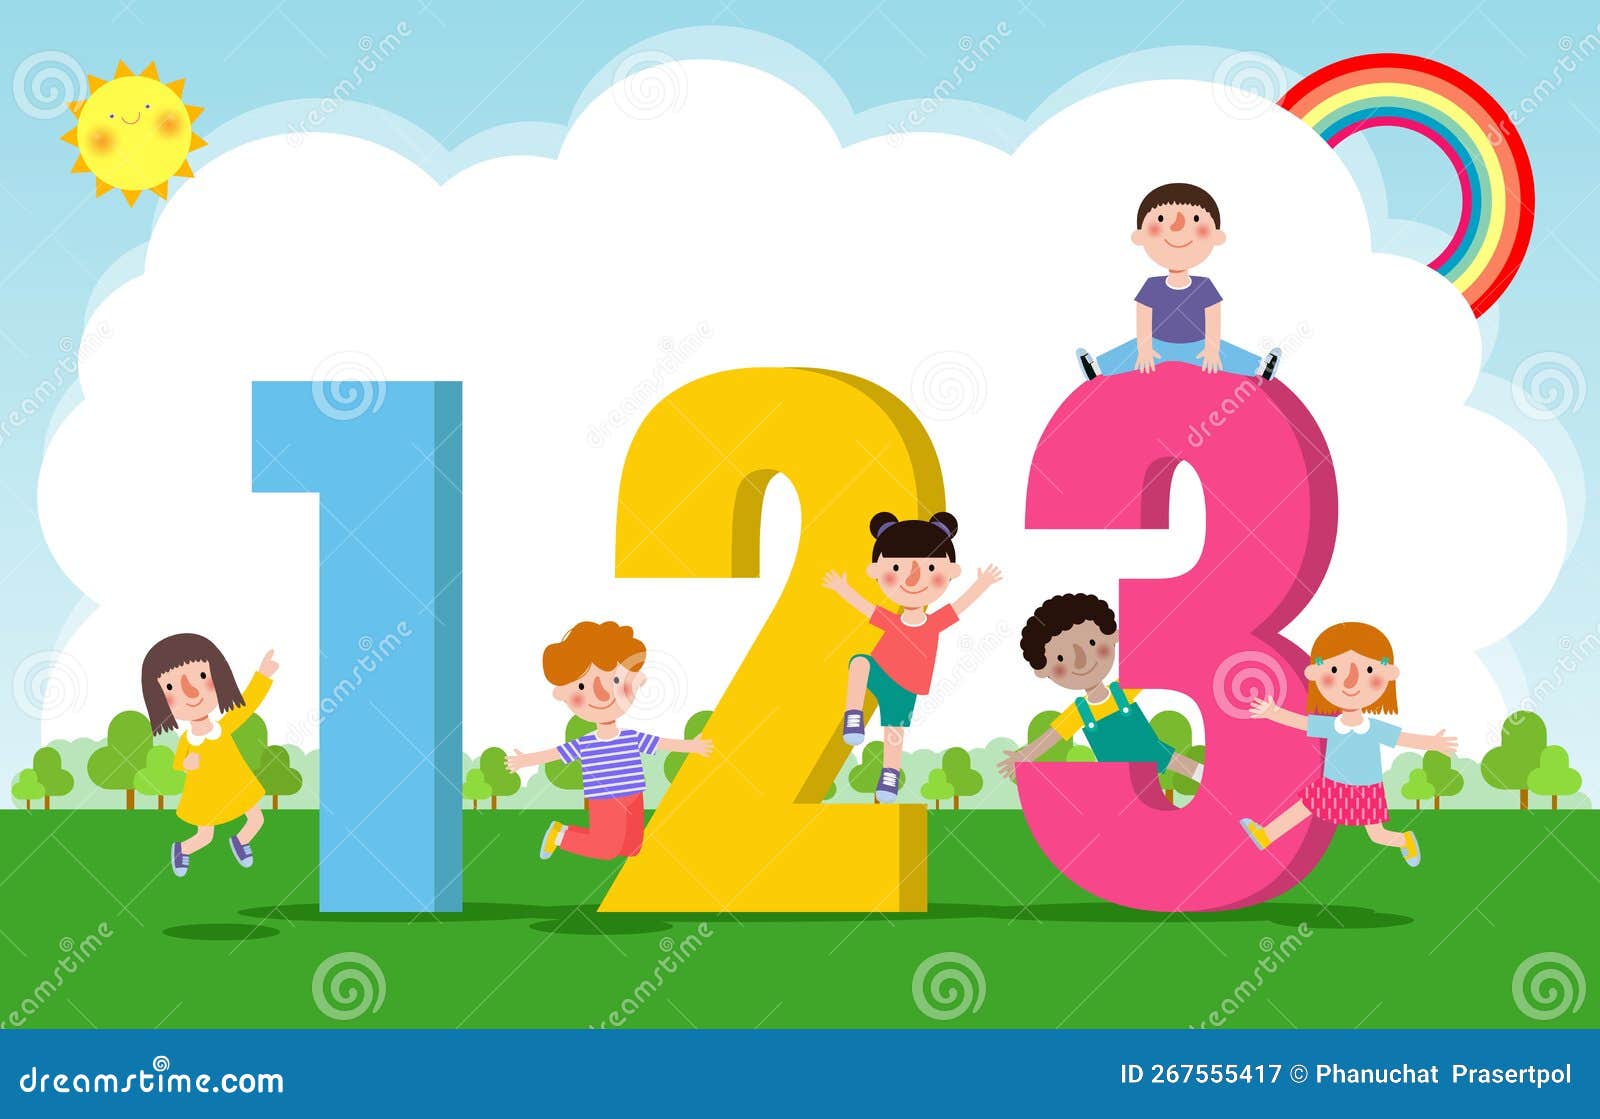 cartoon kids with 123 numbers, children with numbers  poser background  